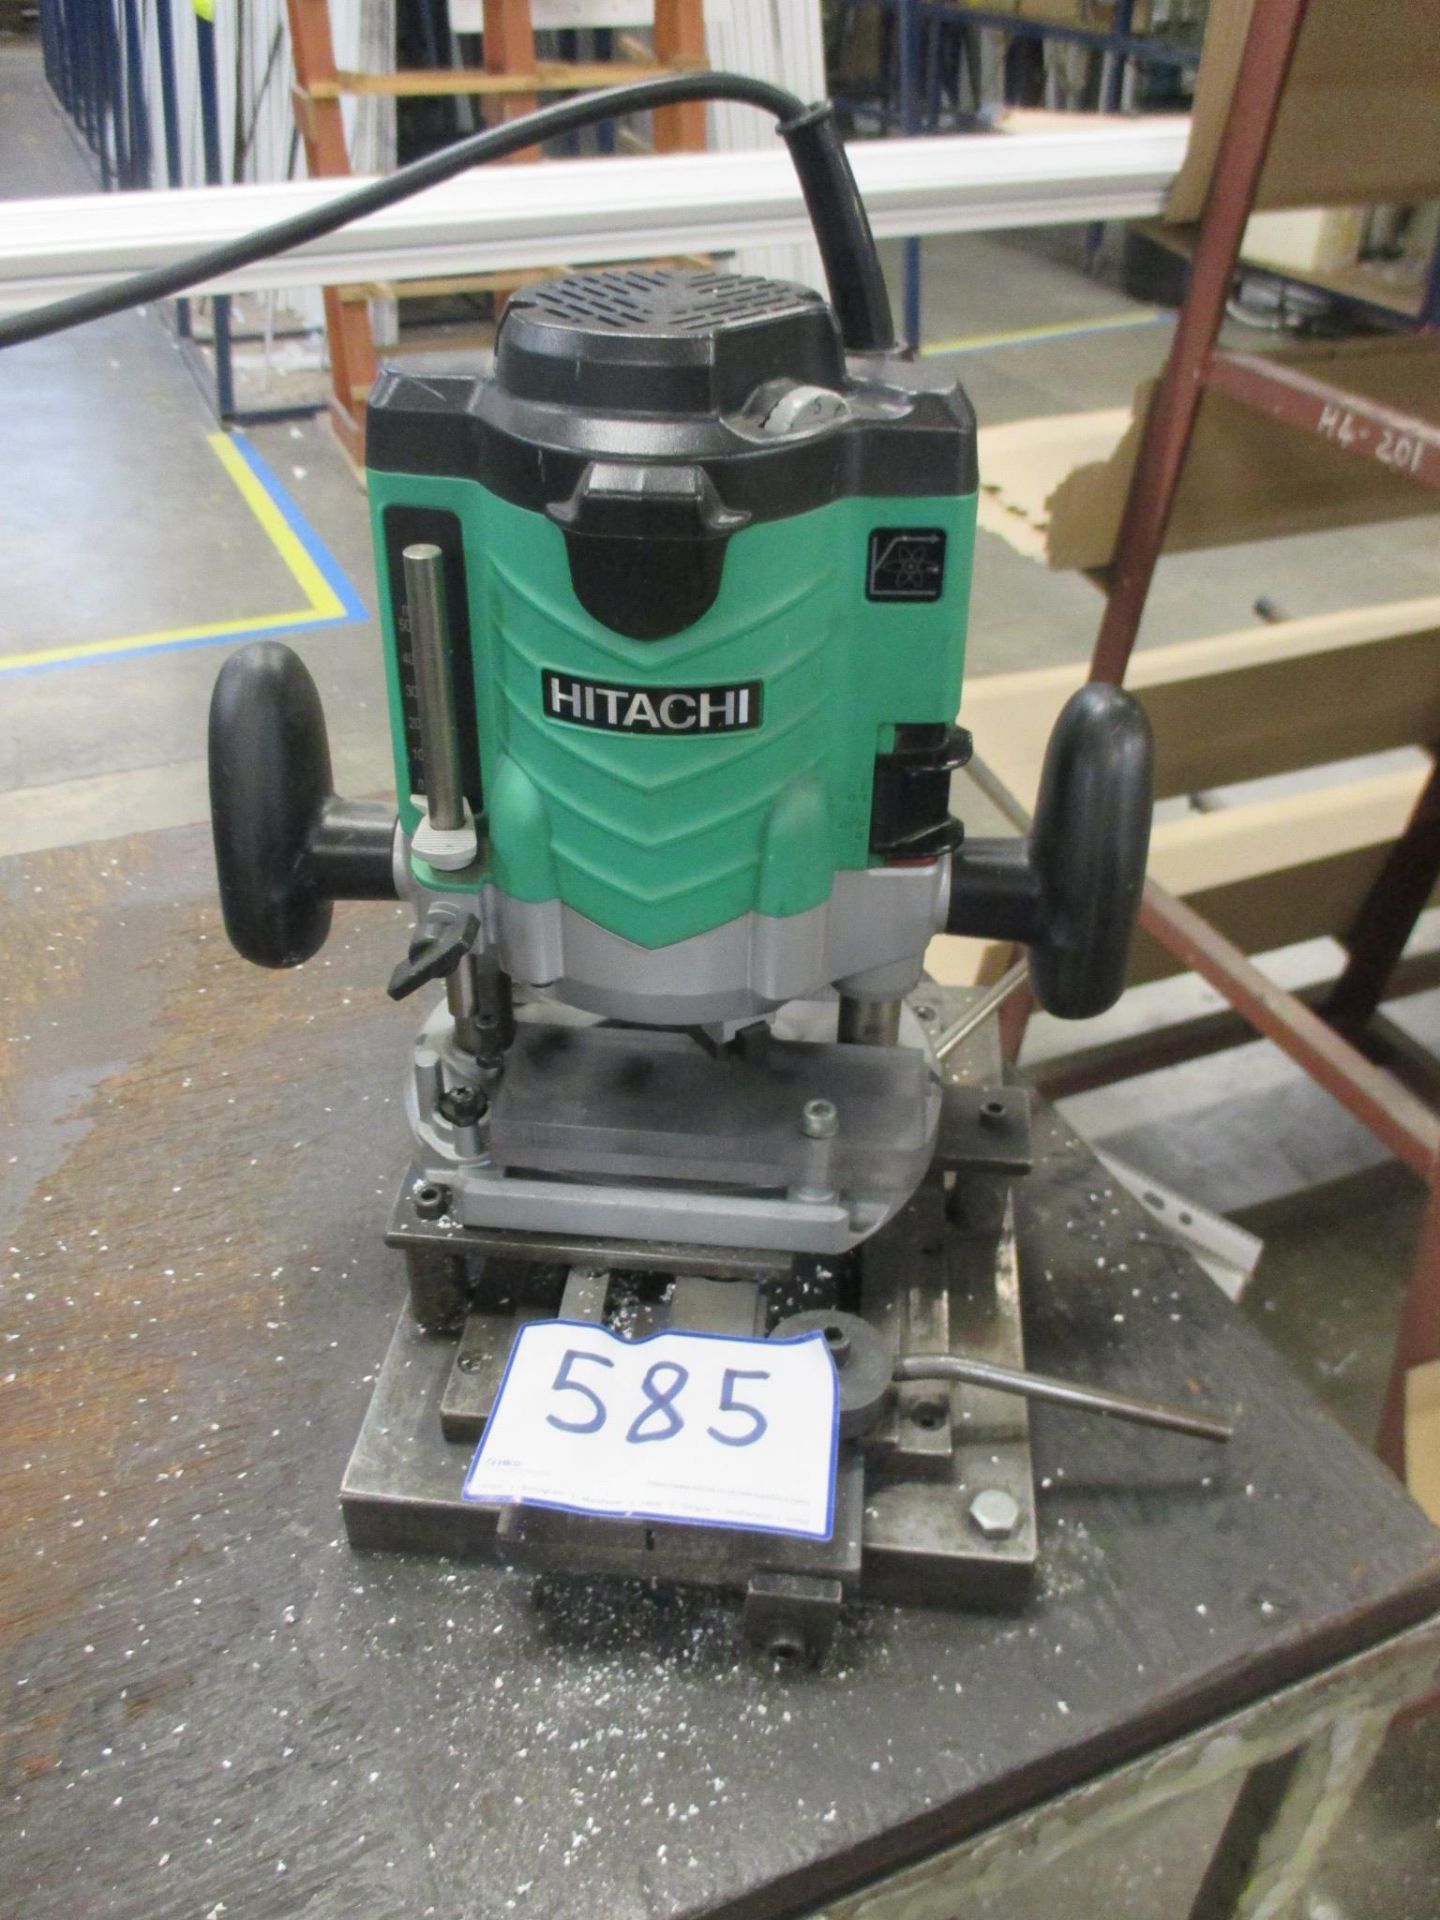 1: Hitachi, M12VE, Variable Speed Router, Serial Number: M1810013, Year of Manufacture: 2011